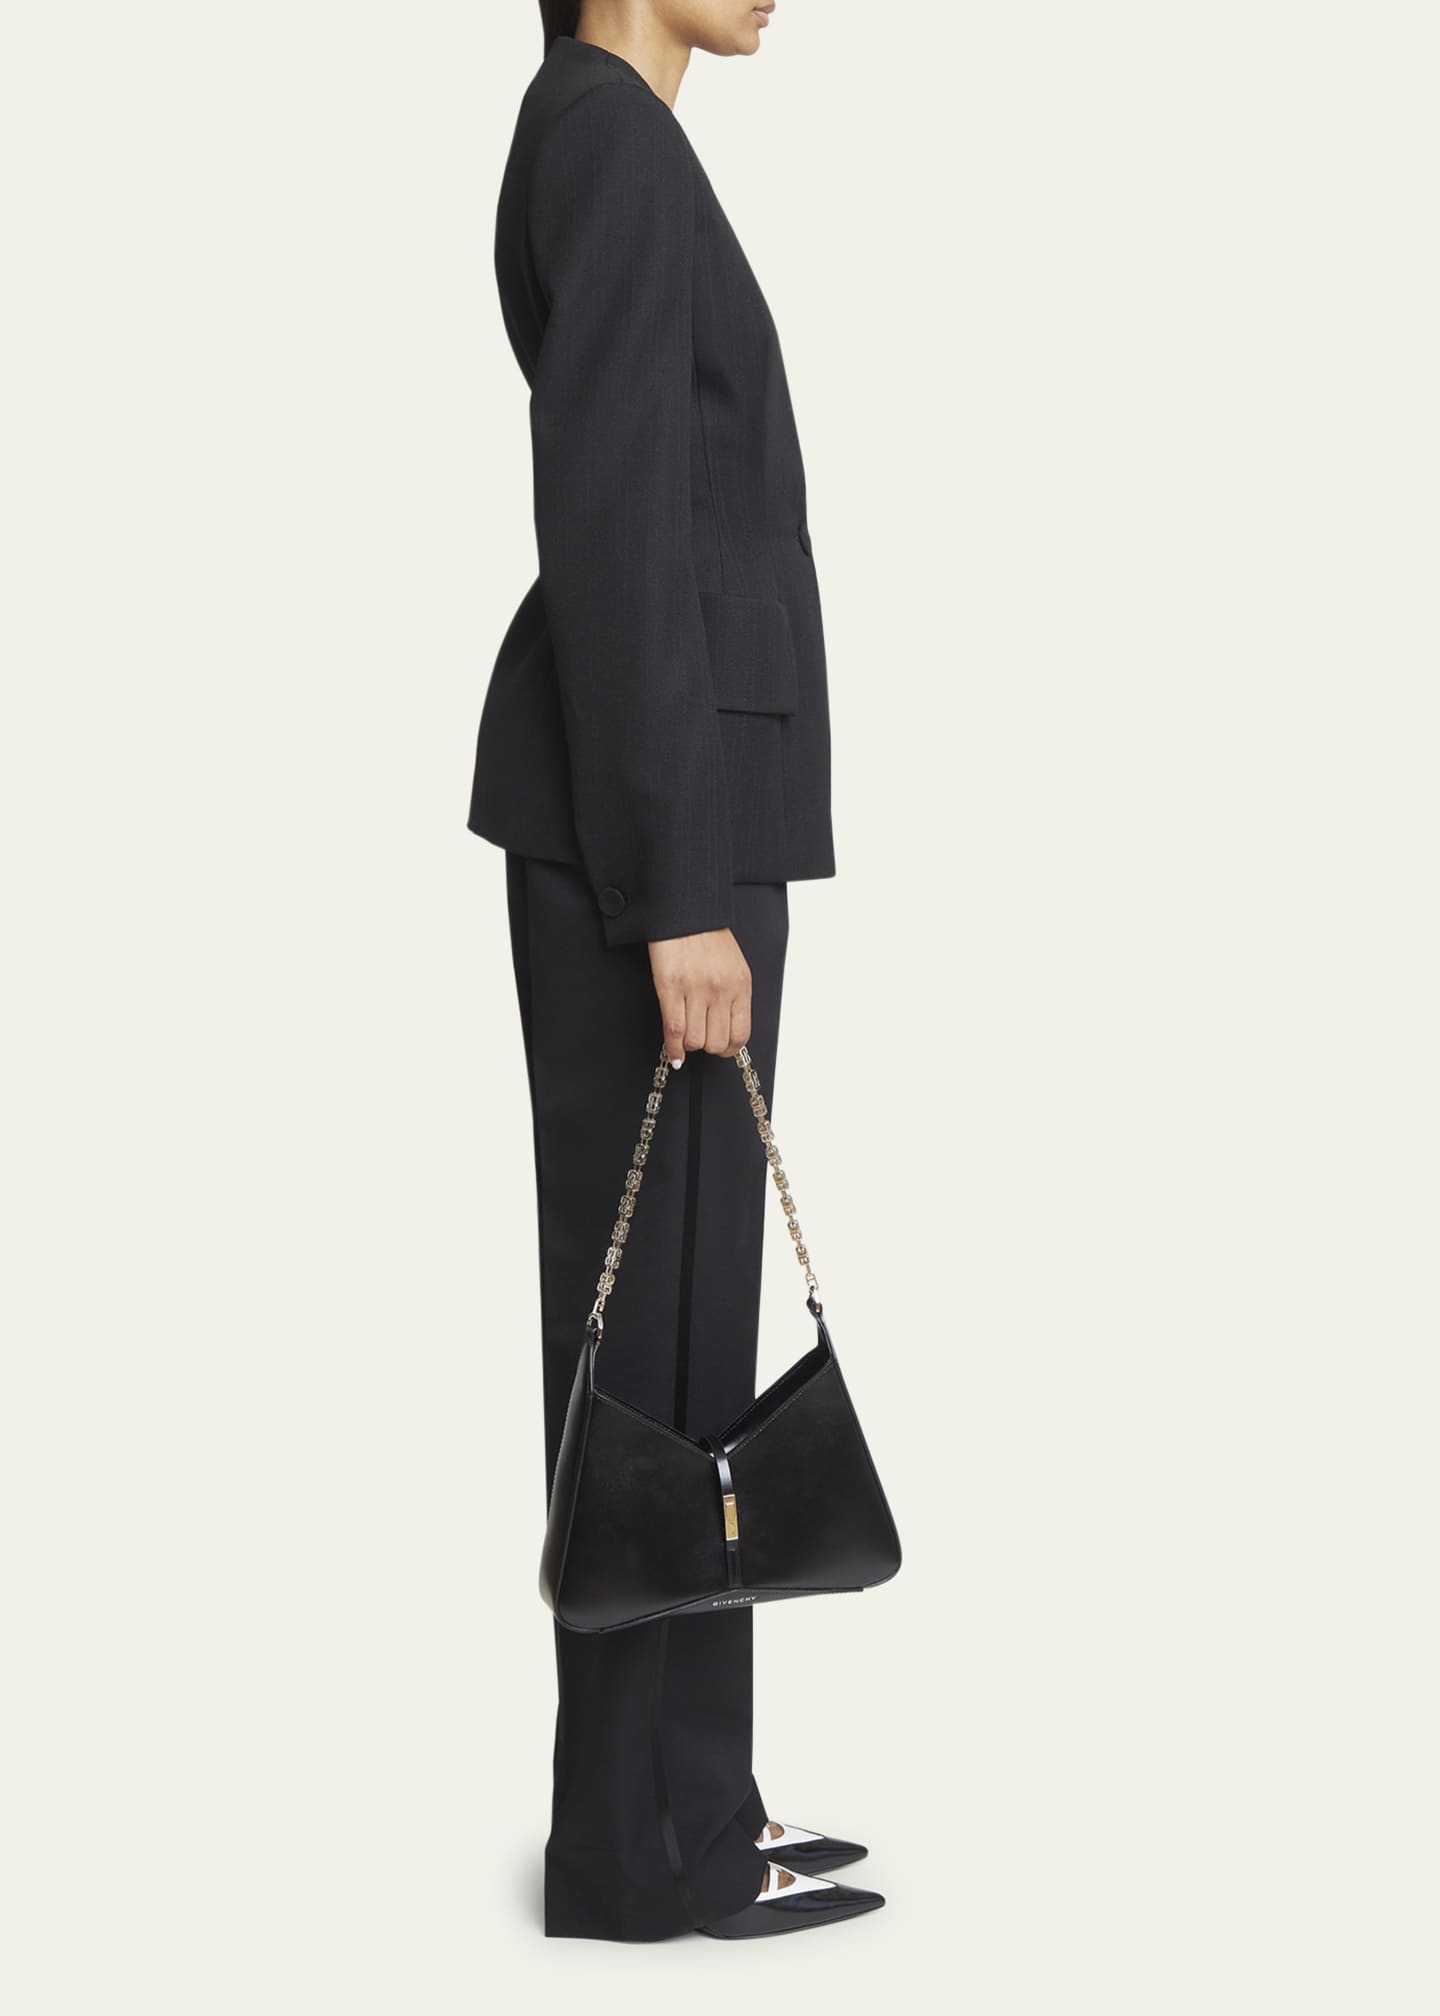 Givenchy Small Cutout Zip Shoulder Bag in Leather - Bergdorf Goodman